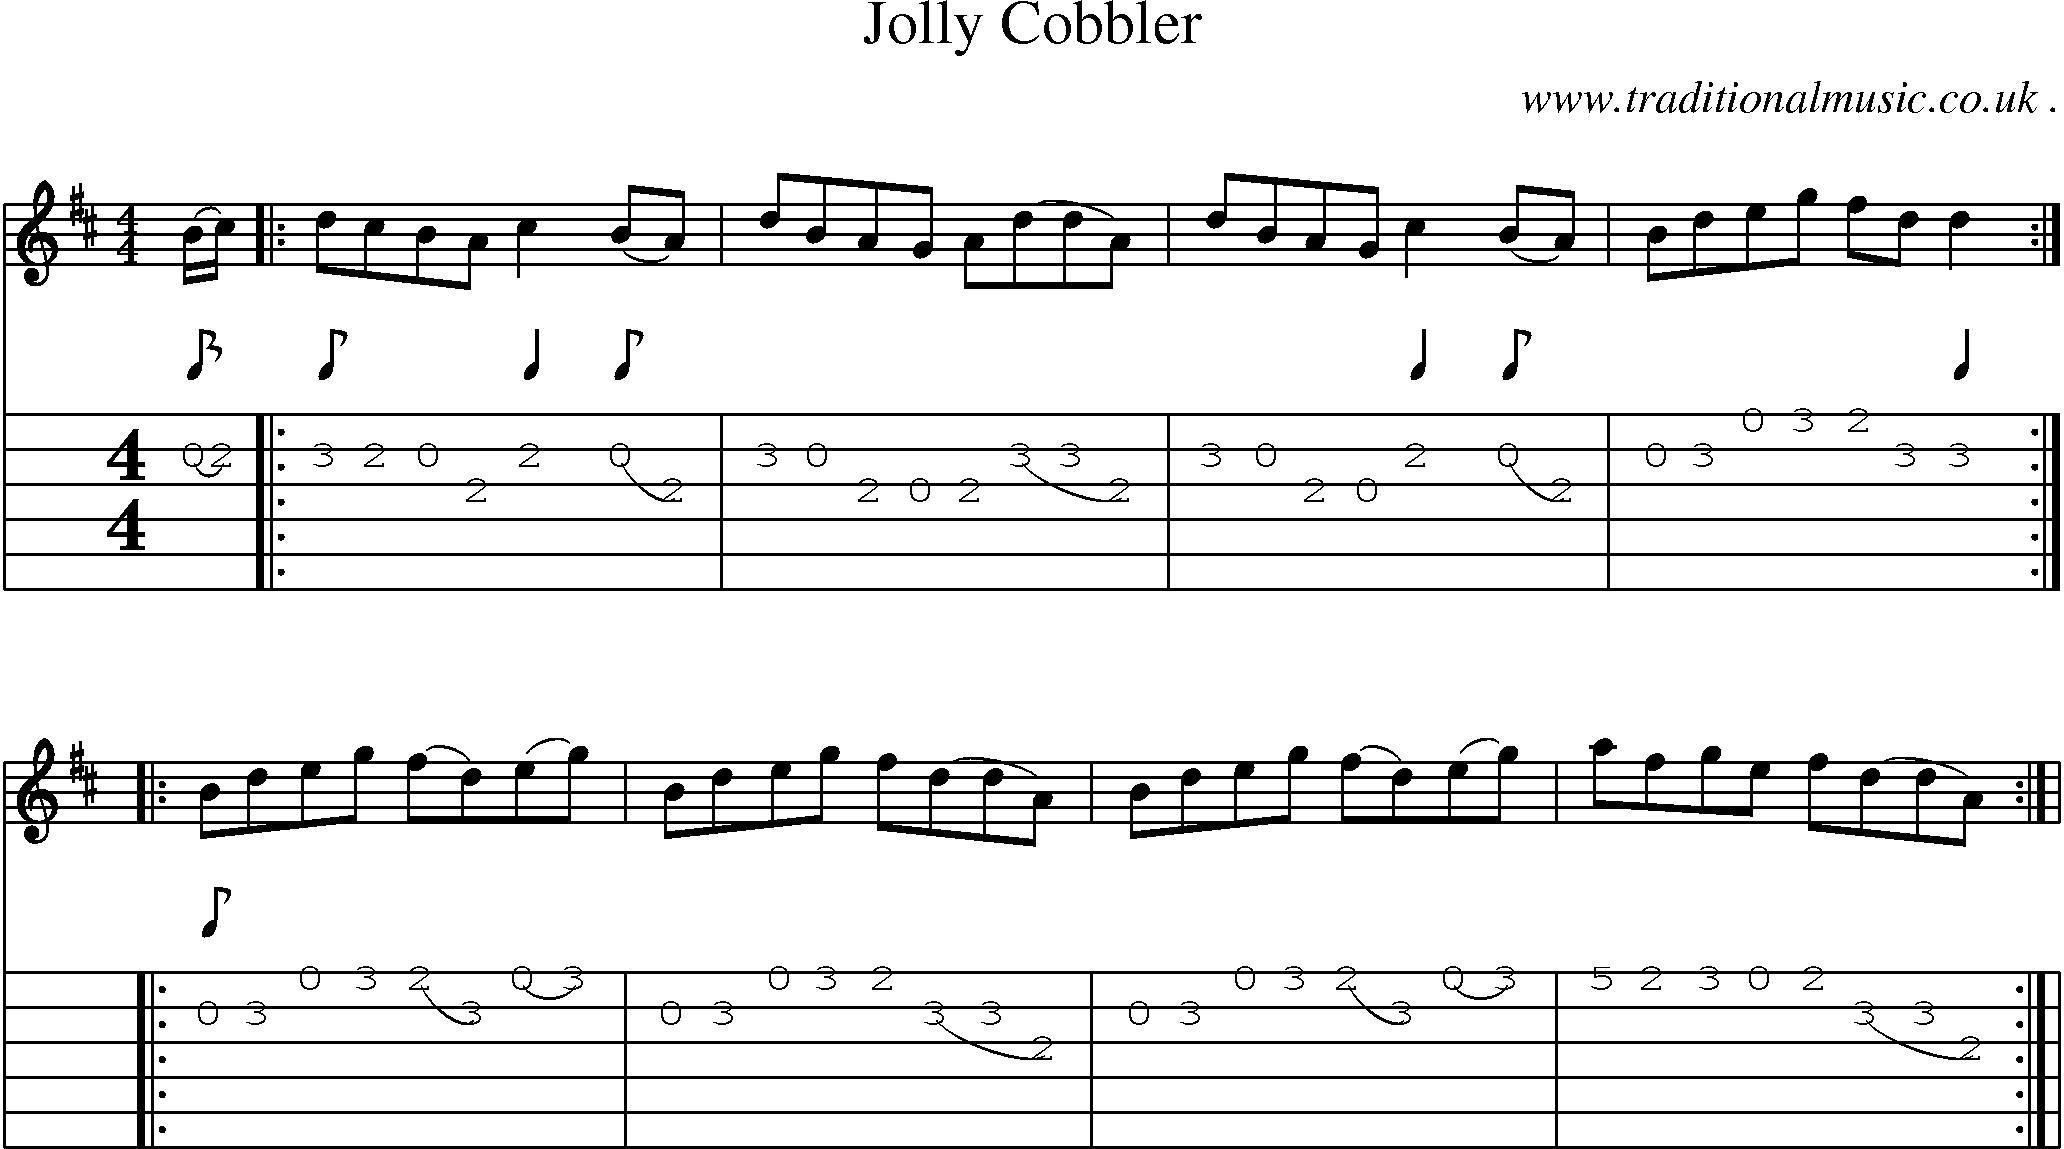 Sheet-Music and Guitar Tabs for Jolly Cobbler